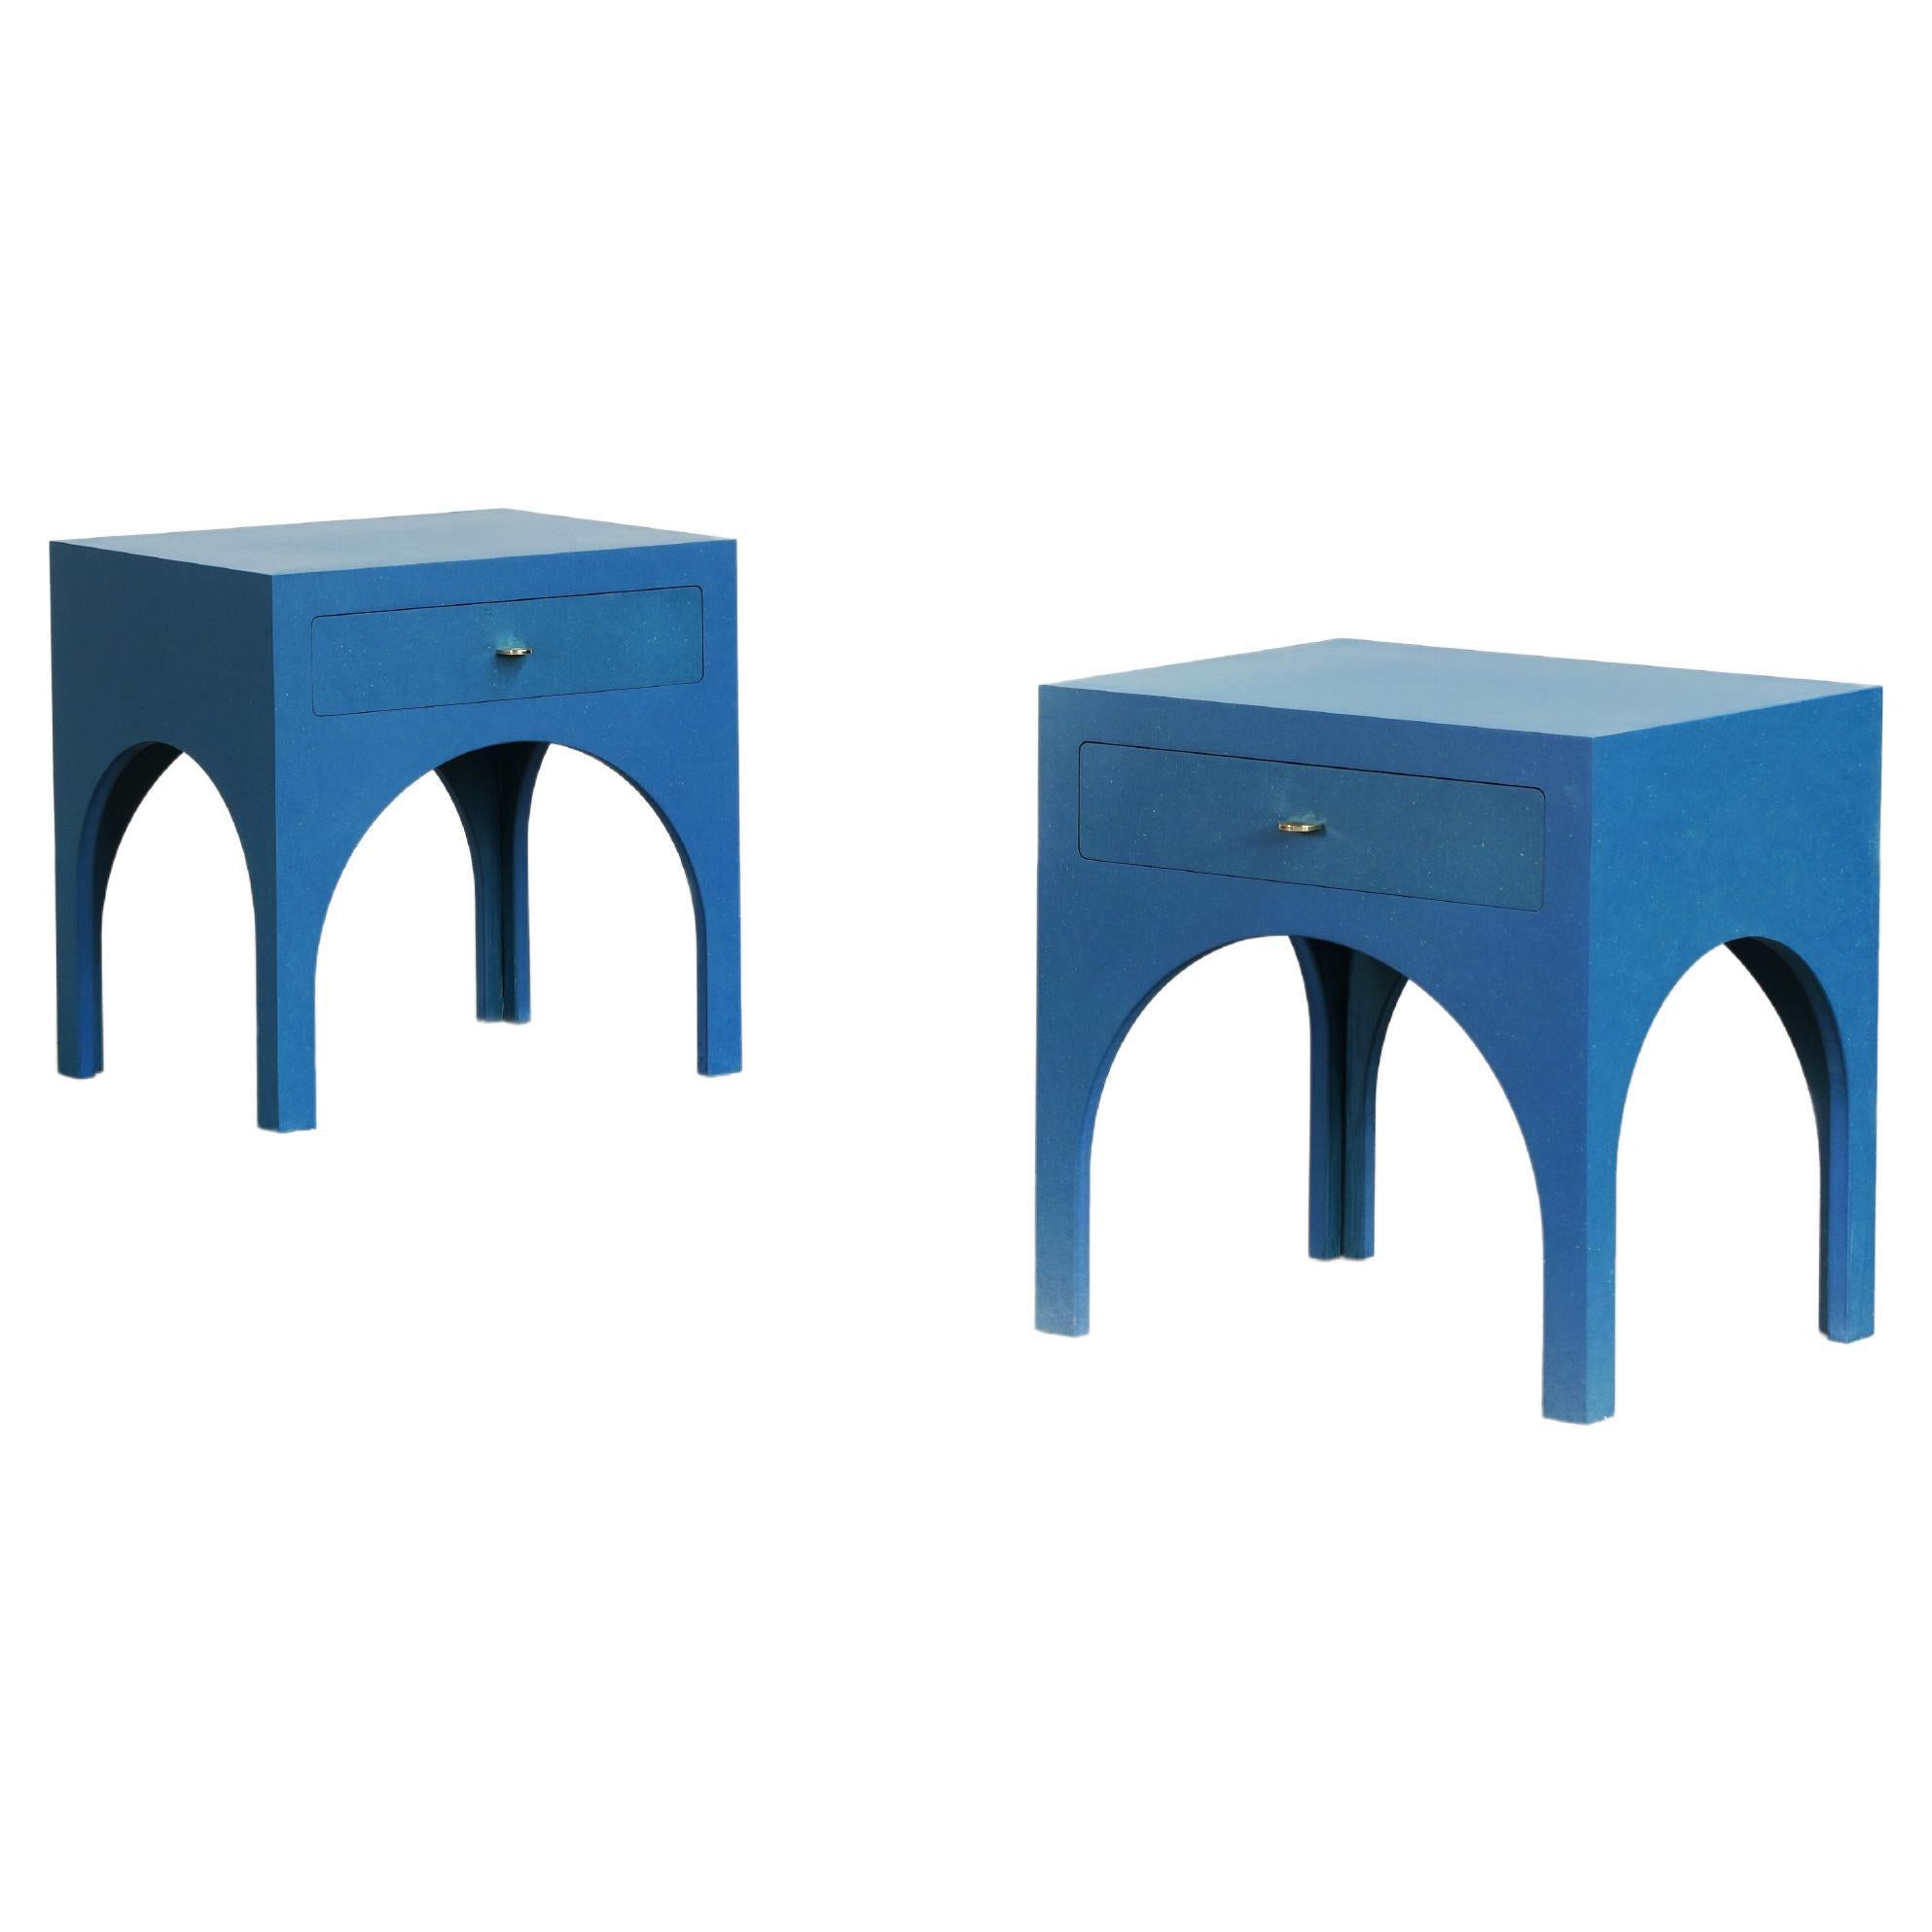 Minimalist Nightstand Console Commode in blue by Atelier Bachmann, 2019 For Sale